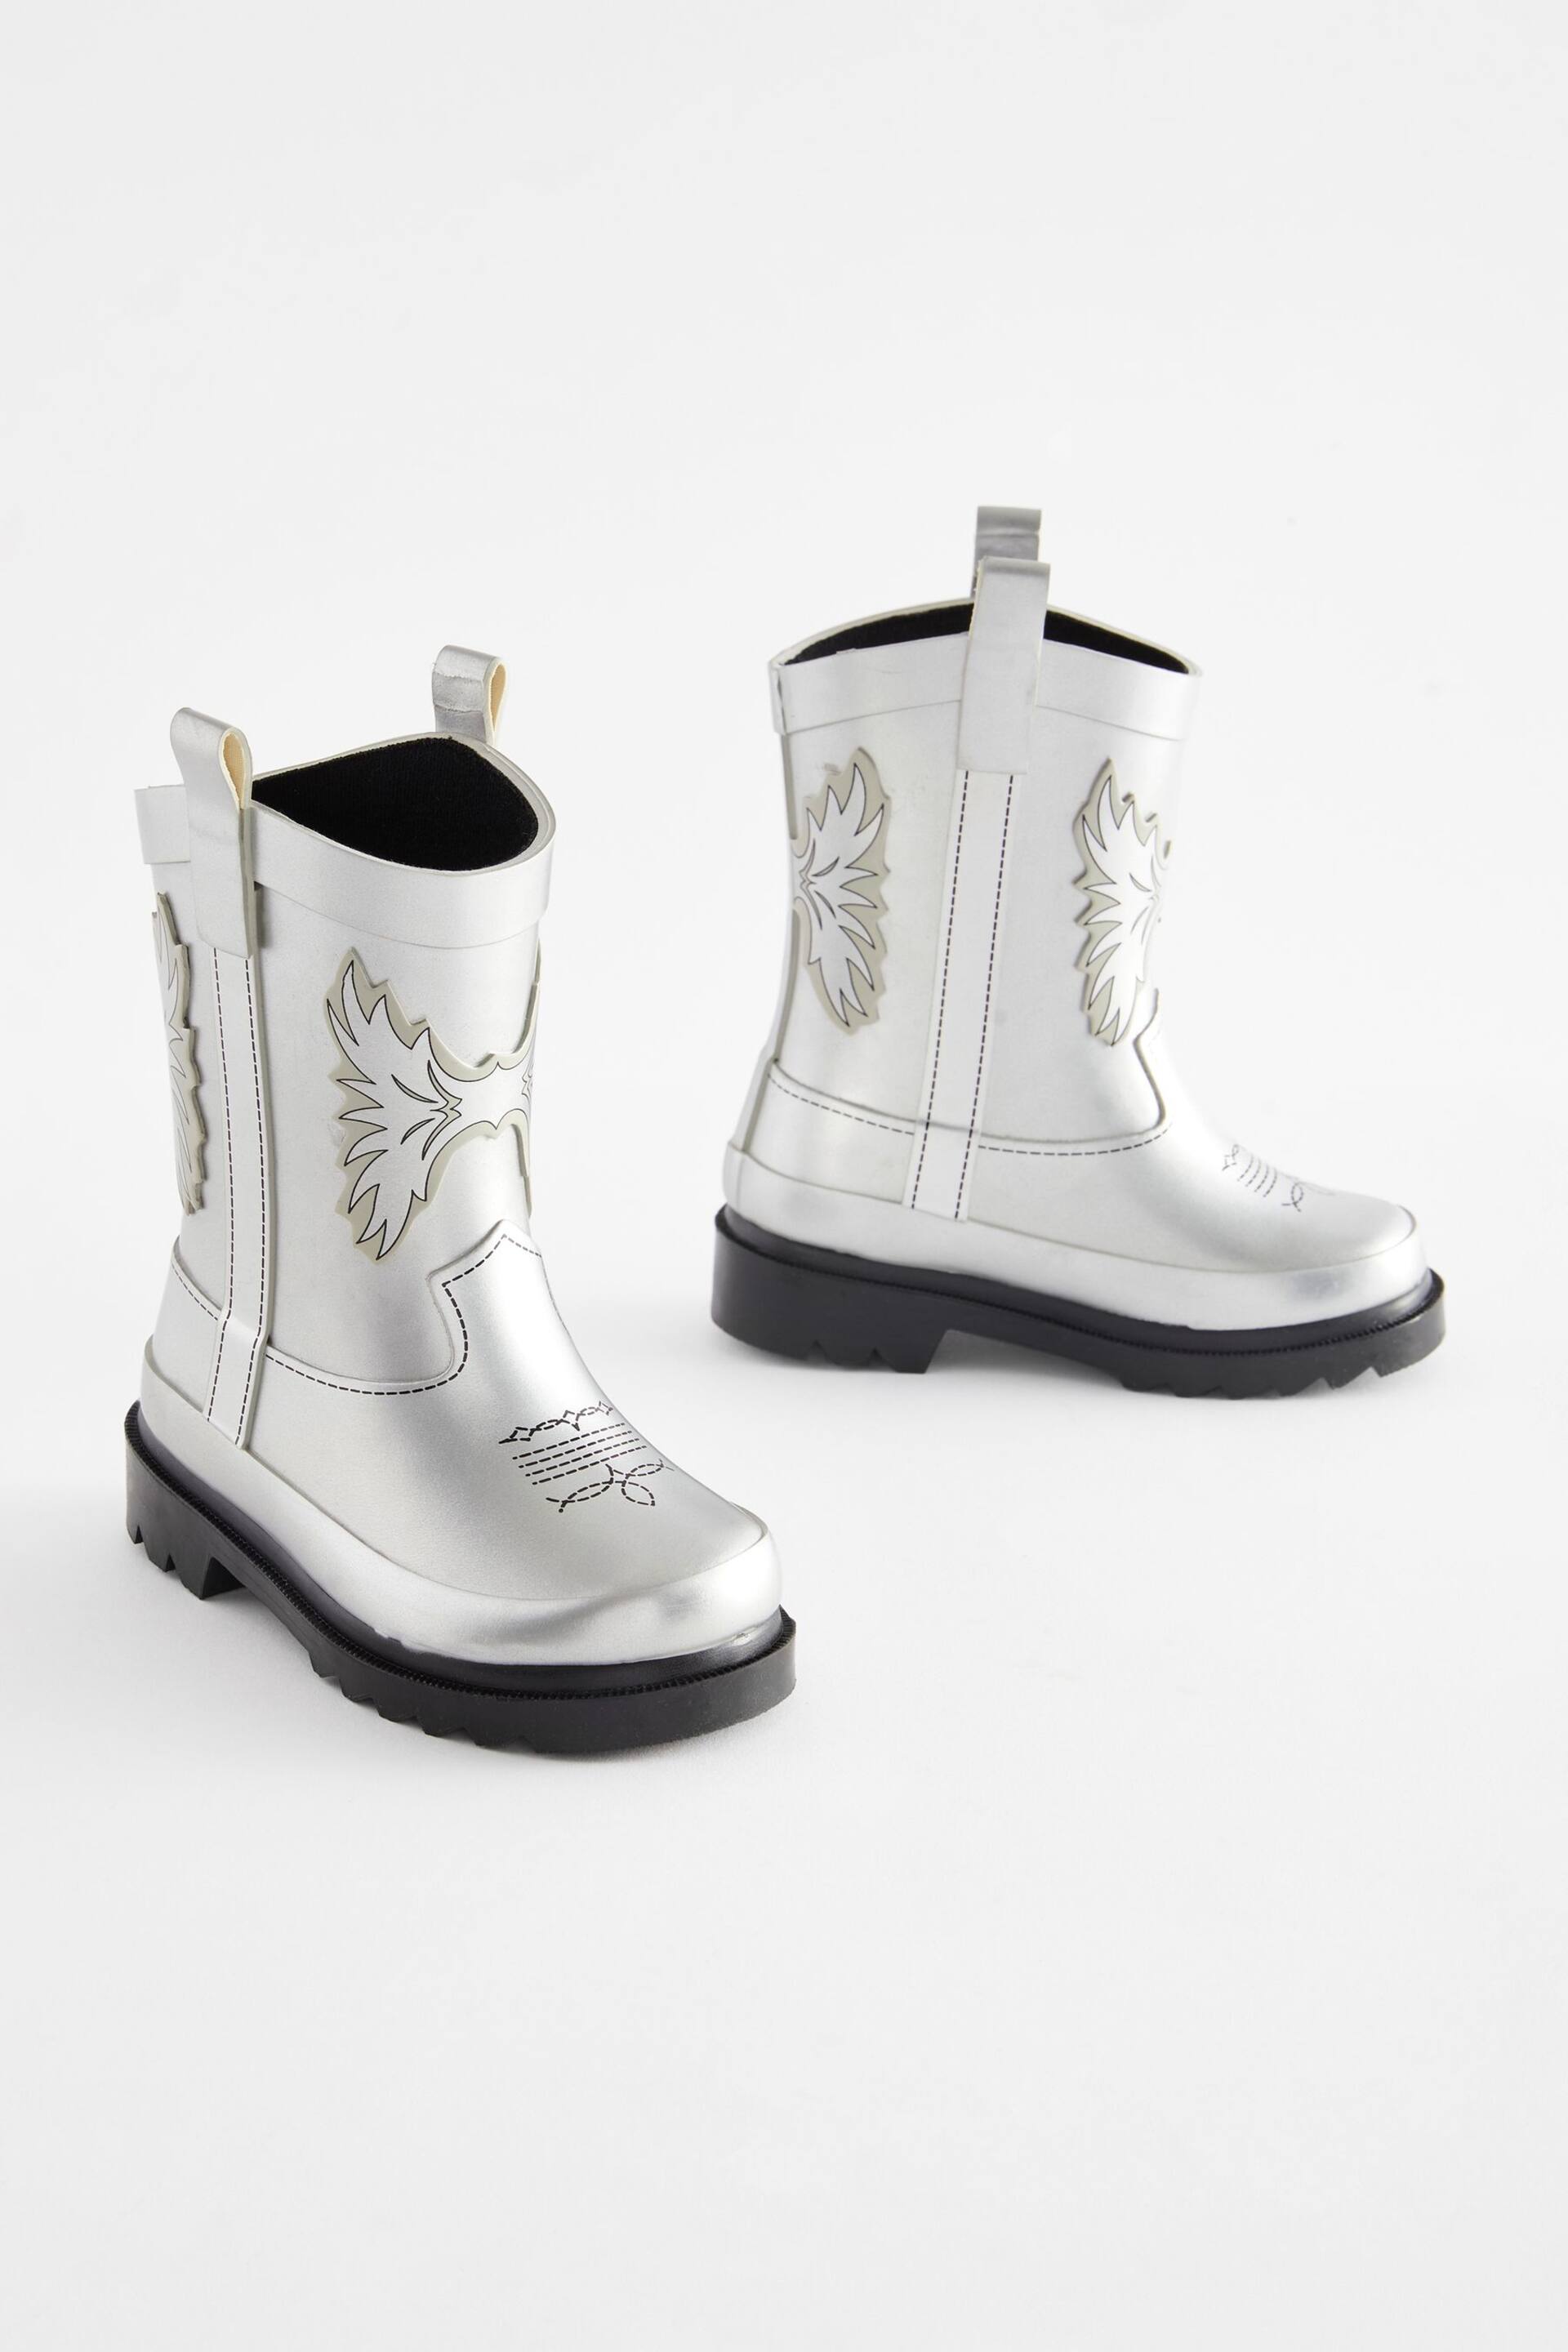 Silver Western Wellies - Image 1 of 5